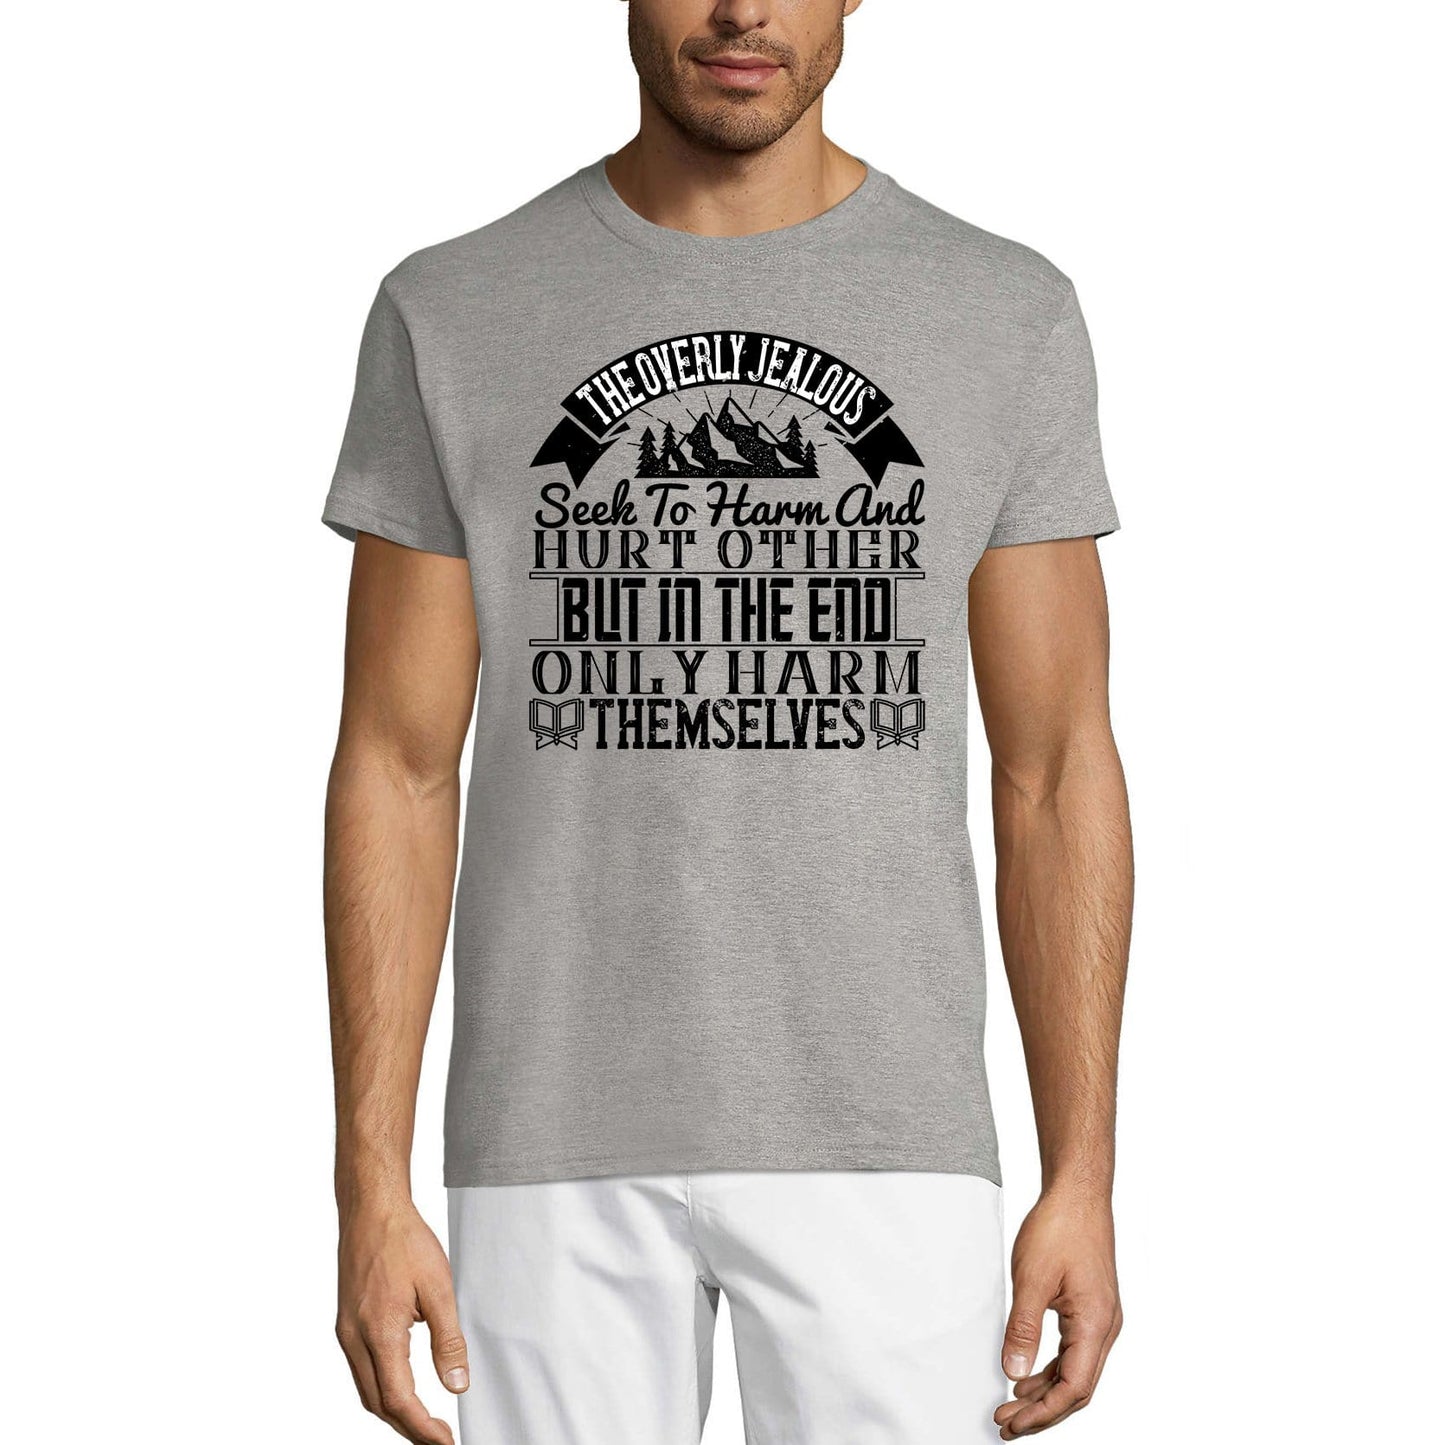 ULTRABASIC Men's T-Shirt The Overly Jealous Seek To Harm and Hurt Other - Quote